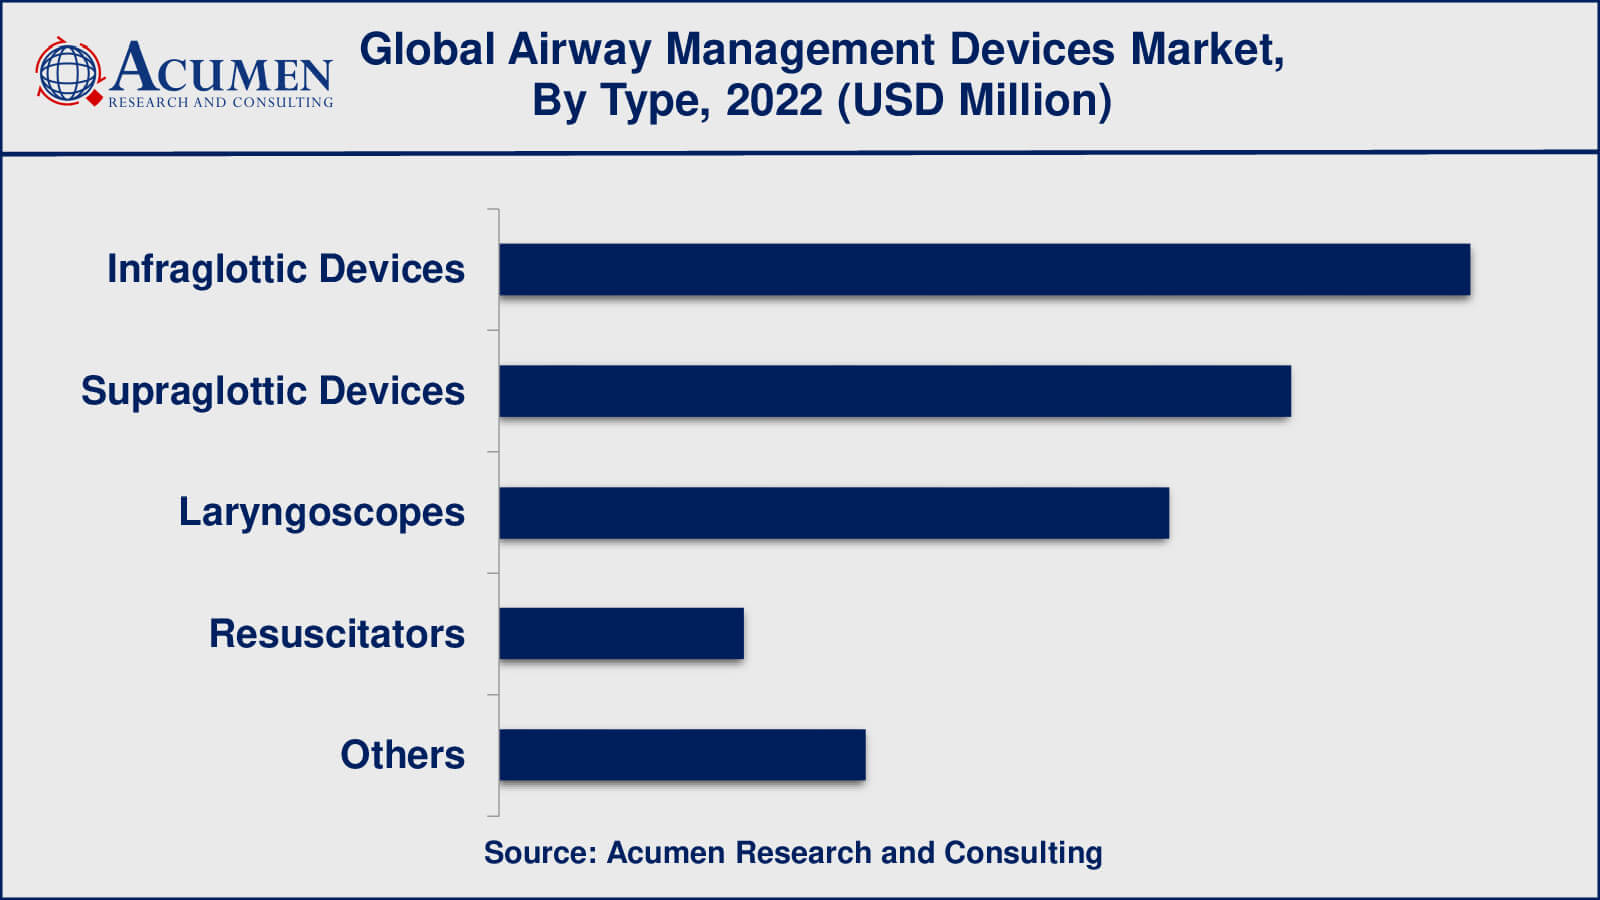 Airway Management Devices Market Drivers